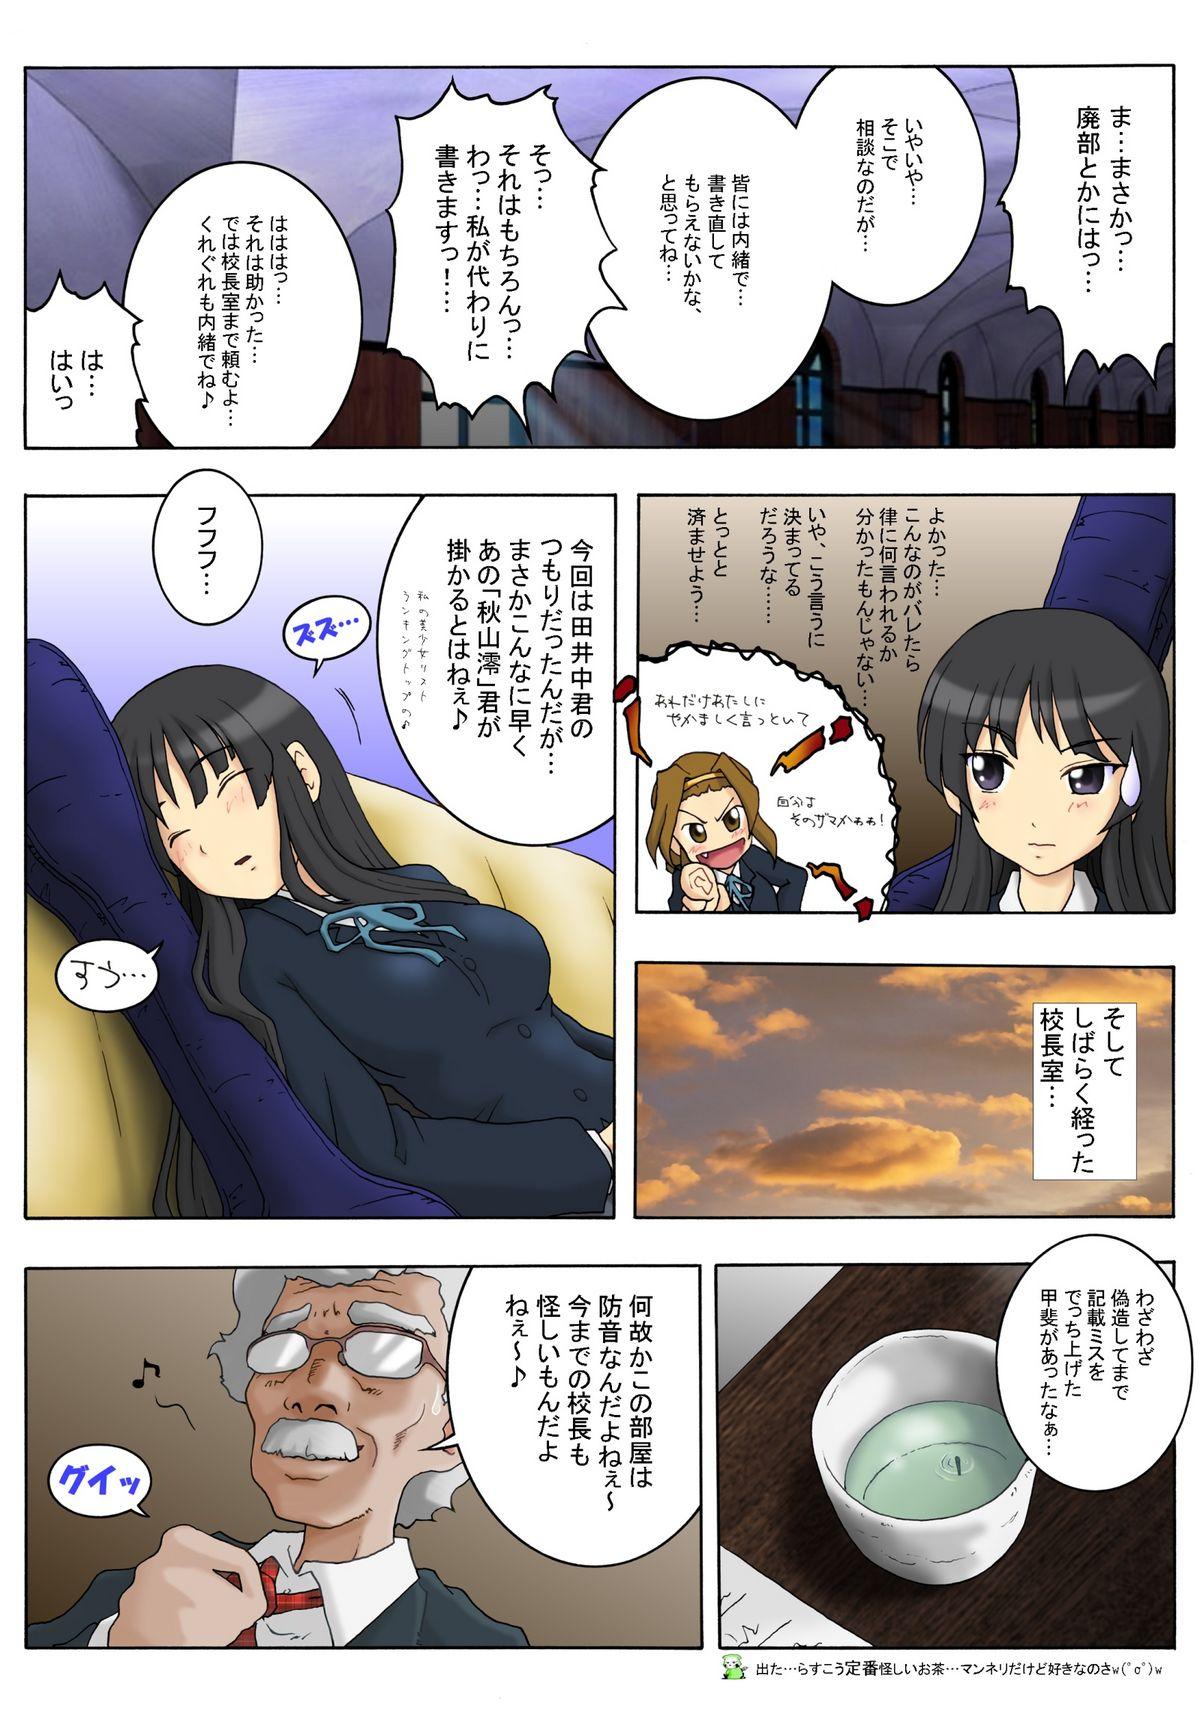 Solo Female Miotsukushi - K-on Submissive - Page 4